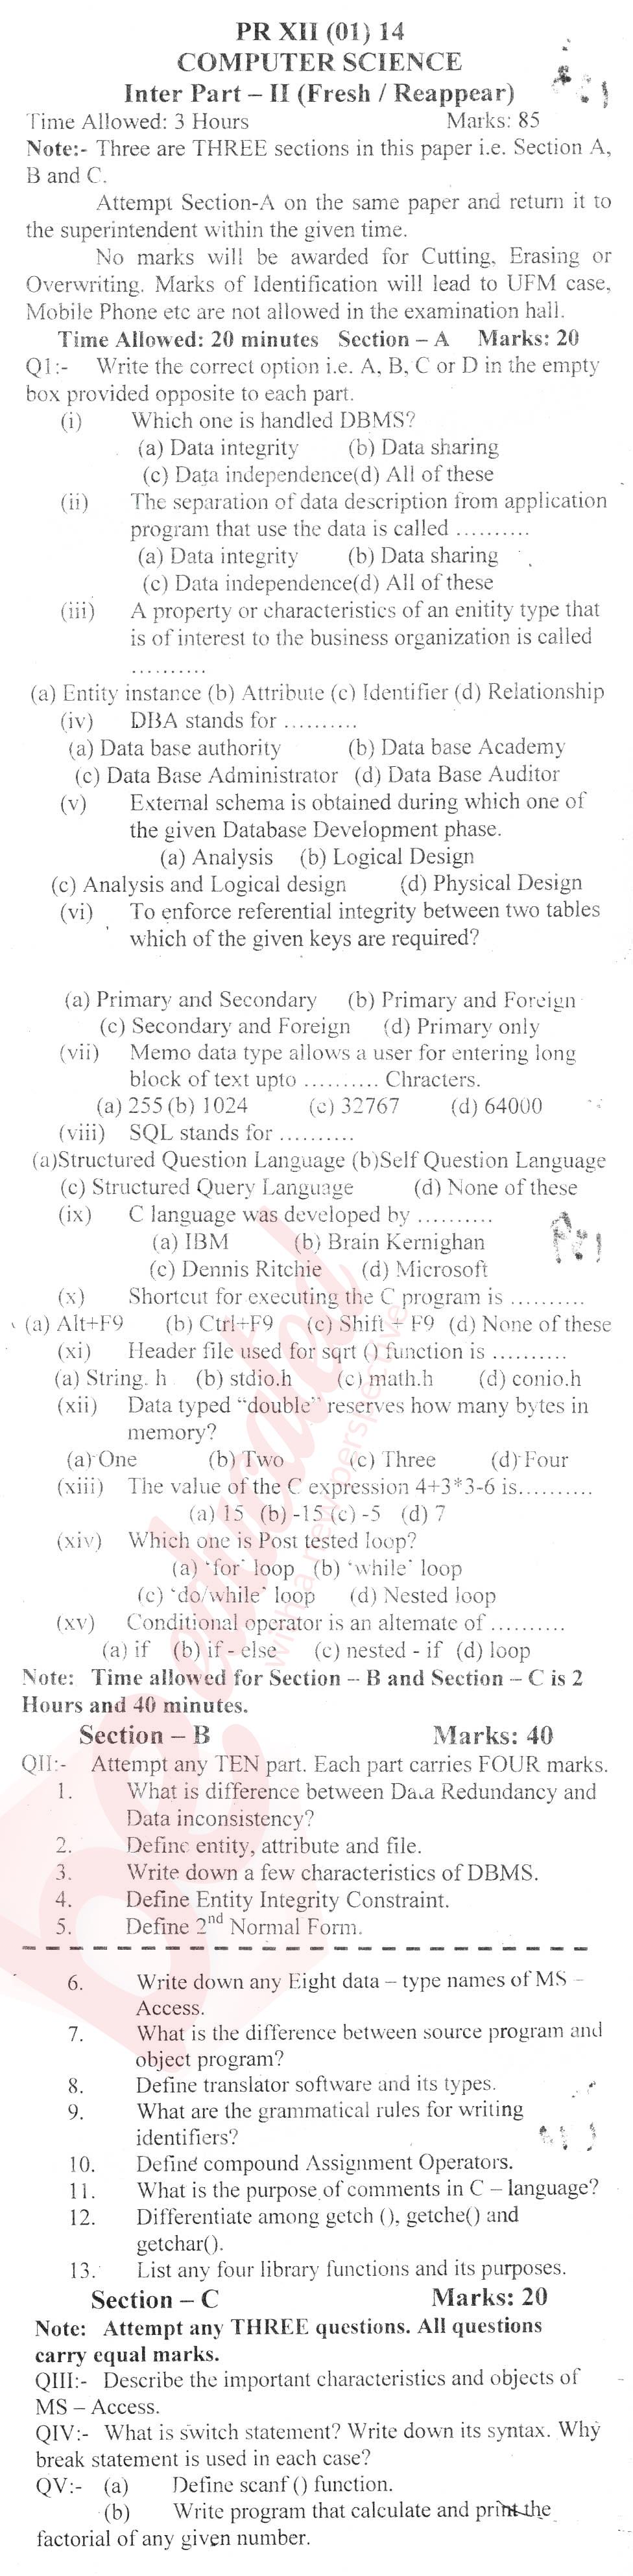 Computer Science ICS Part 2 Past Paper Group 1 BISE Abbottabad 2014